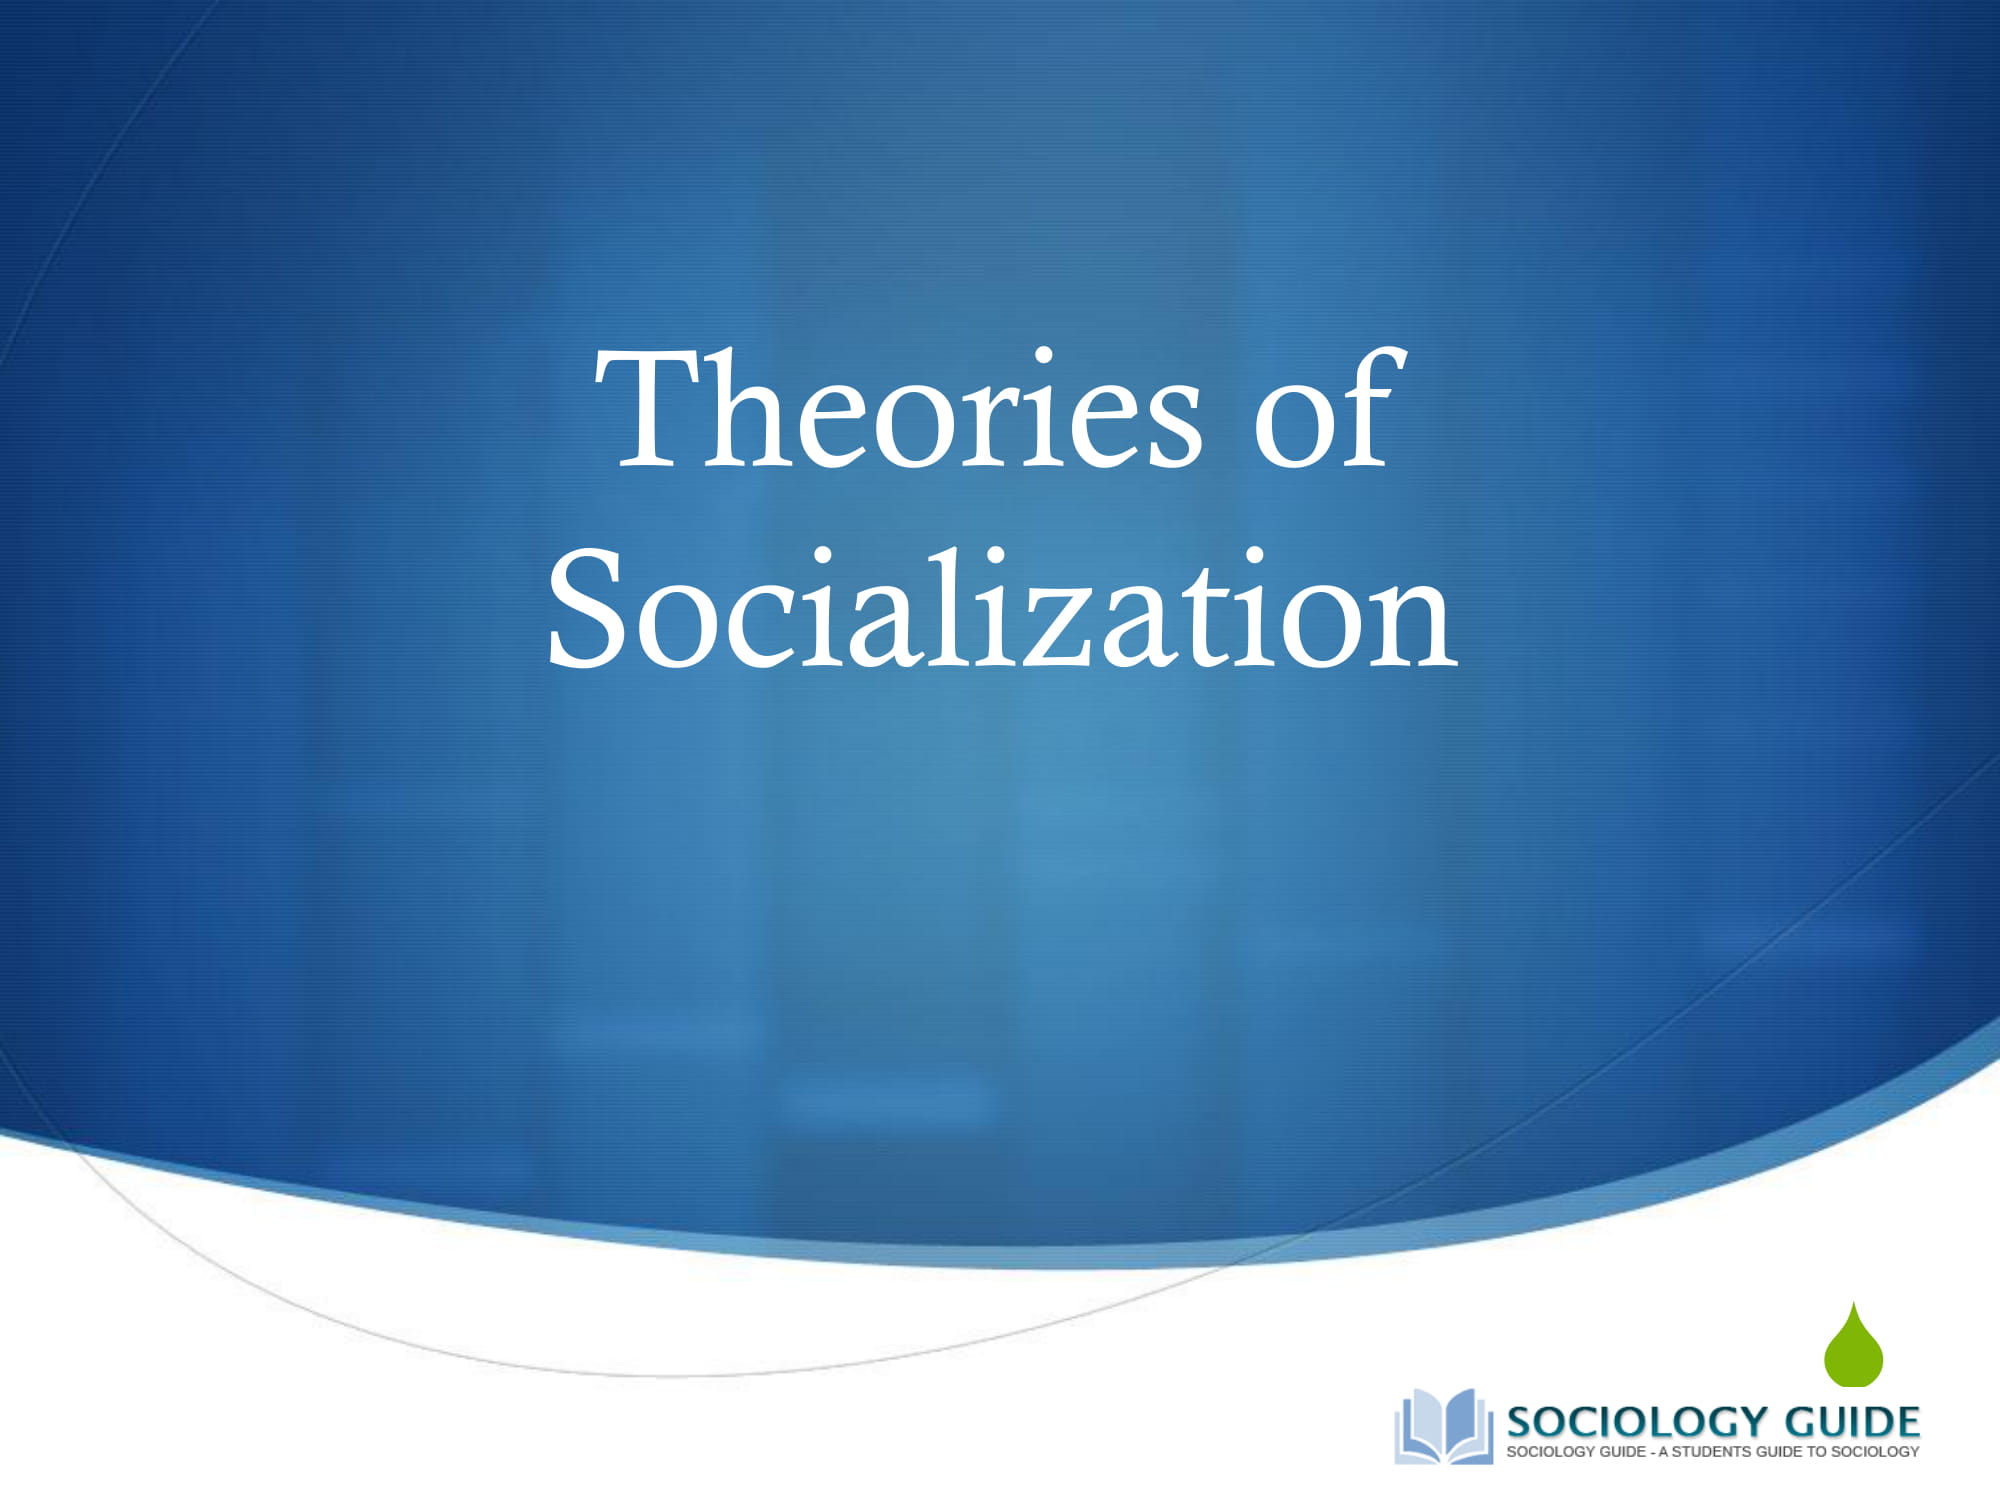 Theories of socialization